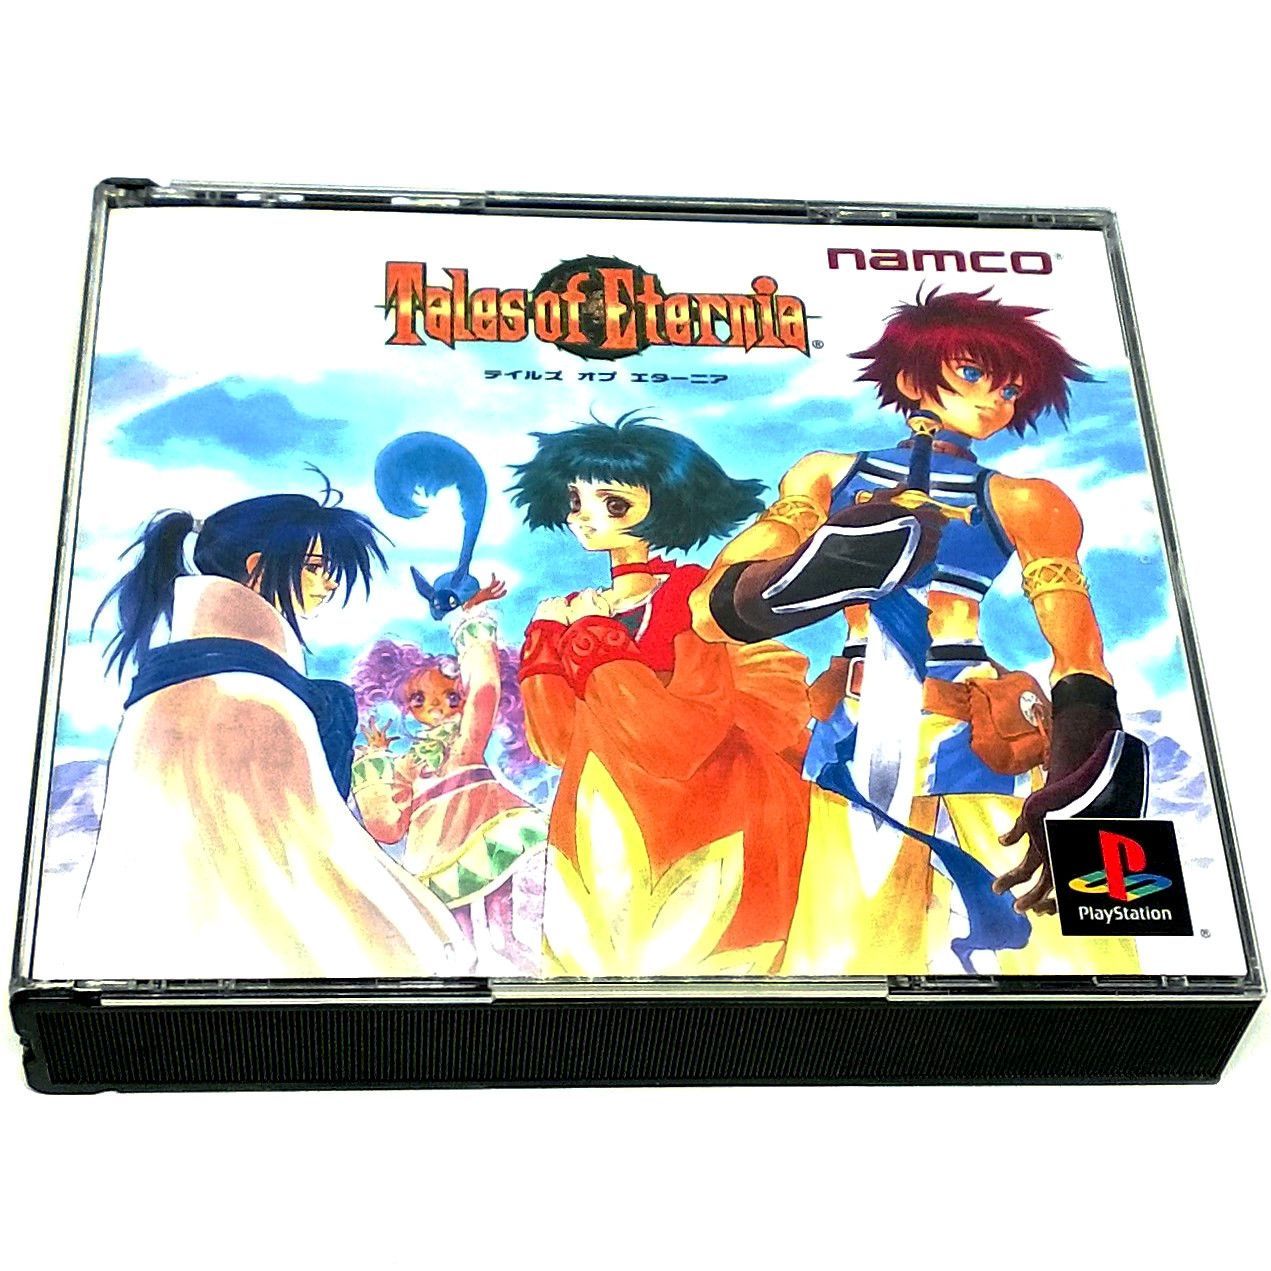 Tales of Eternia for PlayStation (Import) - Front of case